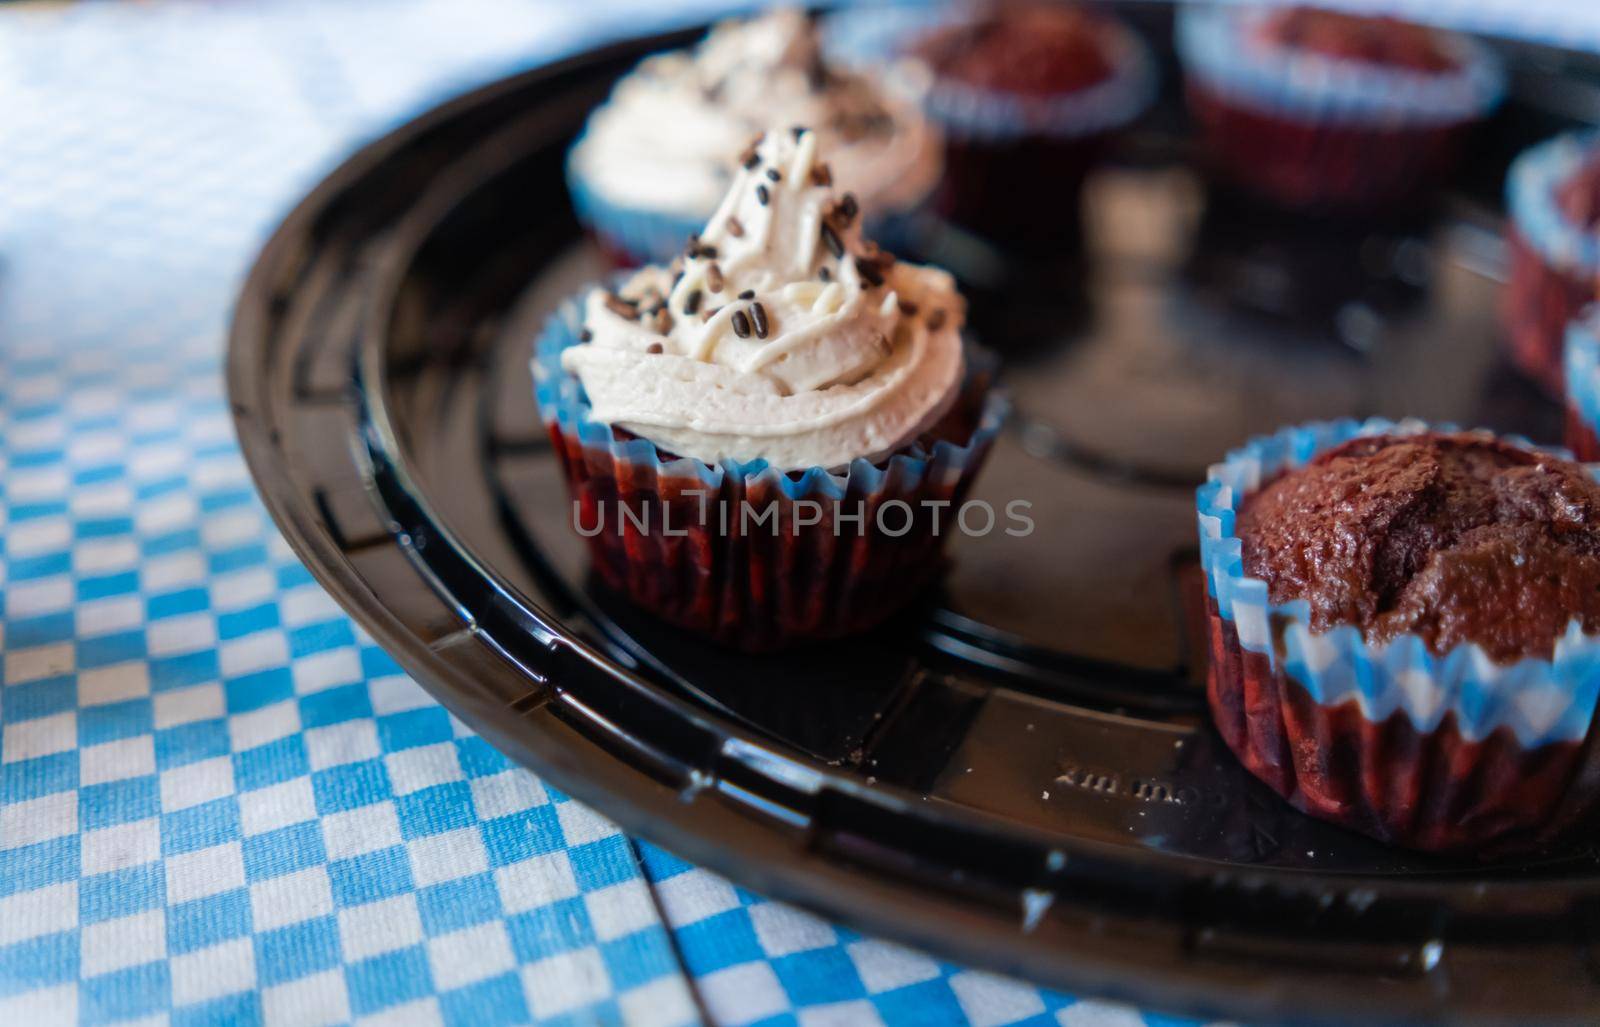 Close-up of two delicious cupcakes and five chocolate muffins on round black plastic tray. Cute pastries with frosting and sprinkles above blue checkered tablecloth. Desserts and sweet food